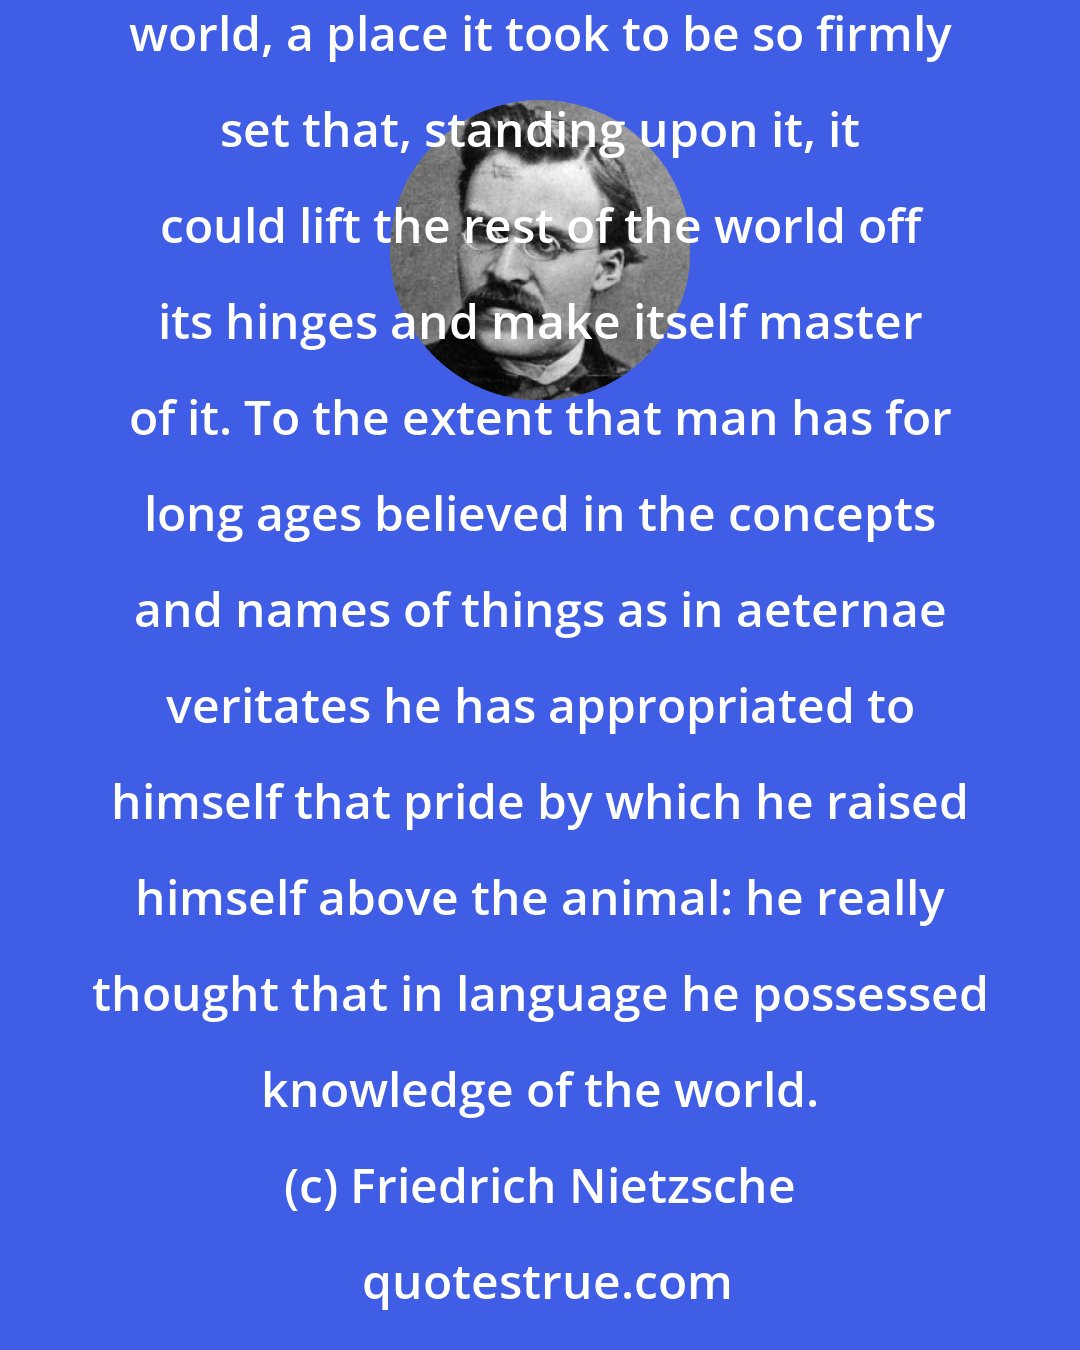 Friedrich Nietzsche: The significance of language for the evolution of culture lies in this, that mankind set up in language a separate world beside the other world, a place it took to be so firmly set that, standing upon it, it could lift the rest of the world off its hinges and make itself master of it. To the extent that man has for long ages believed in the concepts and names of things as in aeternae veritates he has appropriated to himself that pride by which he raised himself above the animal: he really thought that in language he possessed knowledge of the world.